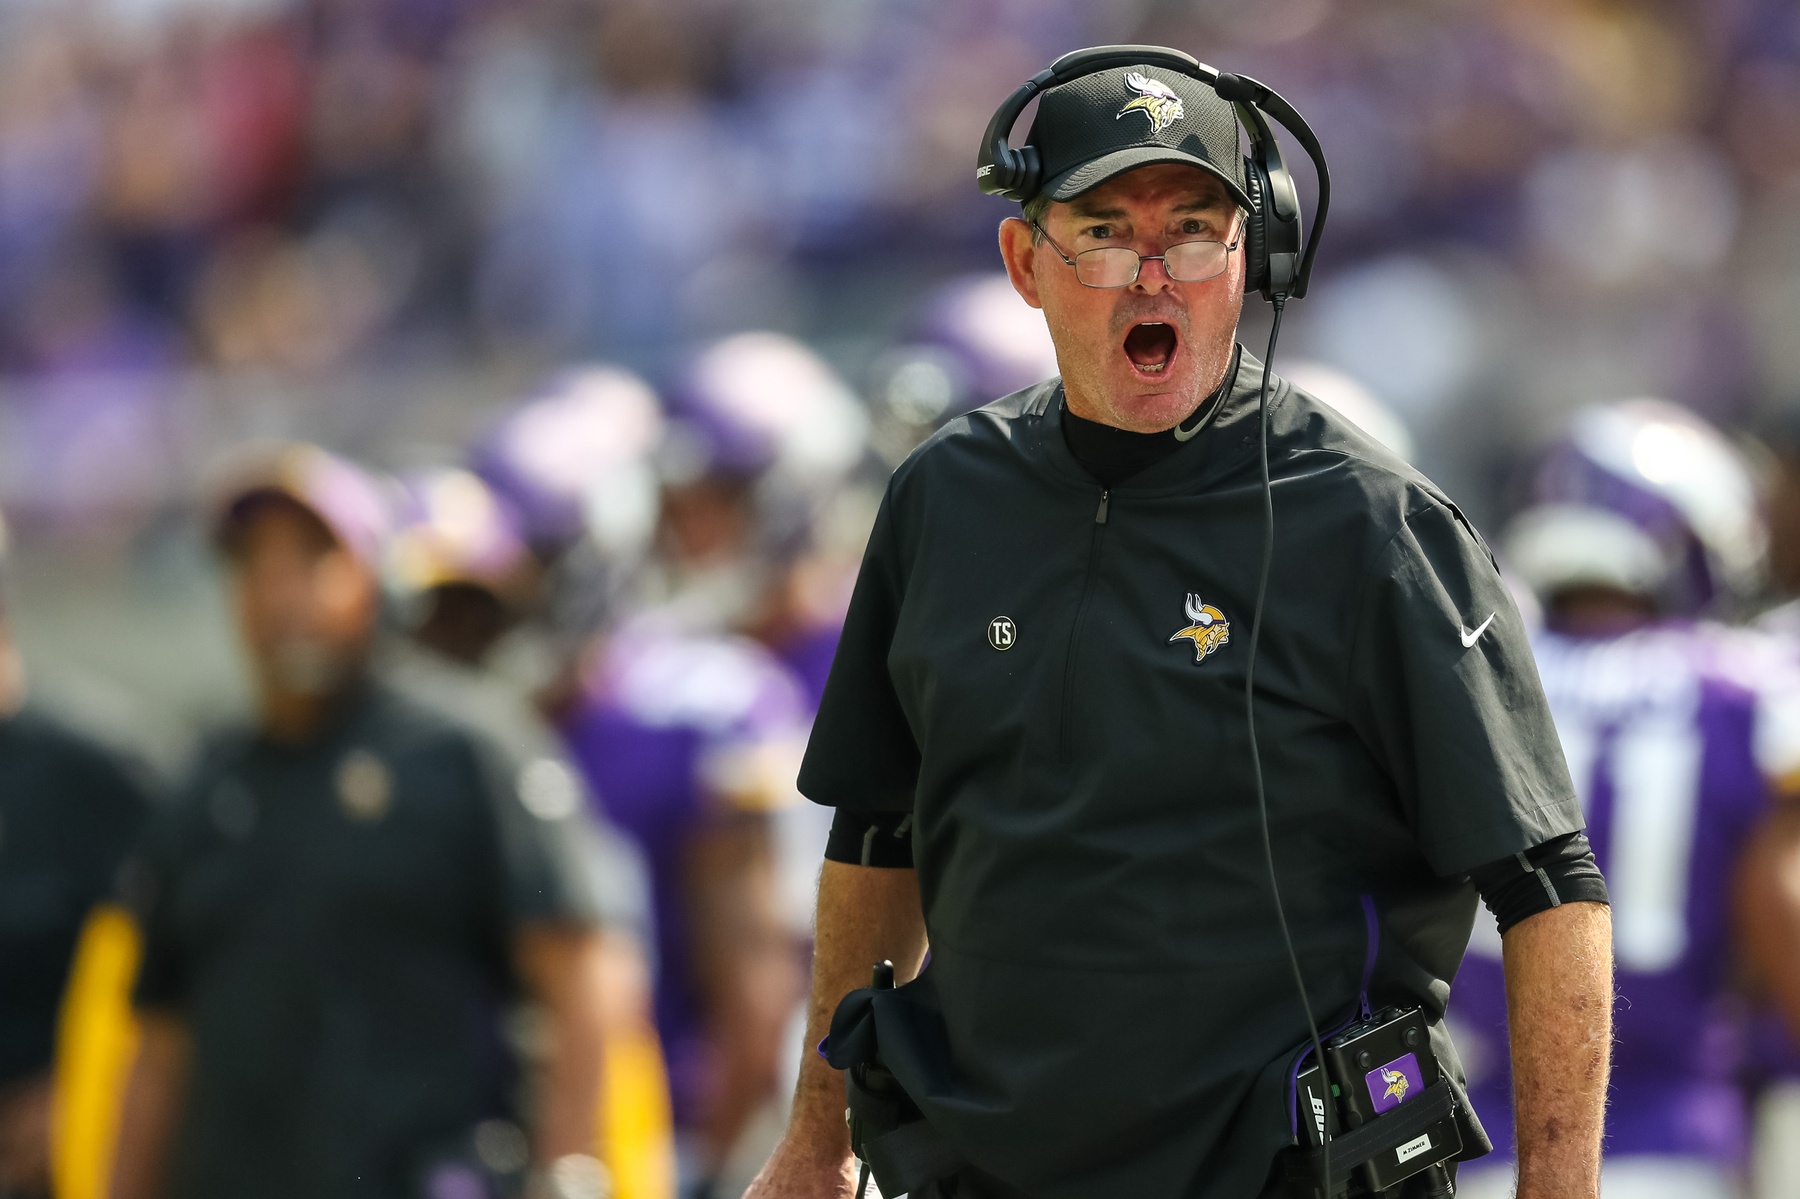 Mike Zimmer's daughter fires back at critics with heartfelt IG post